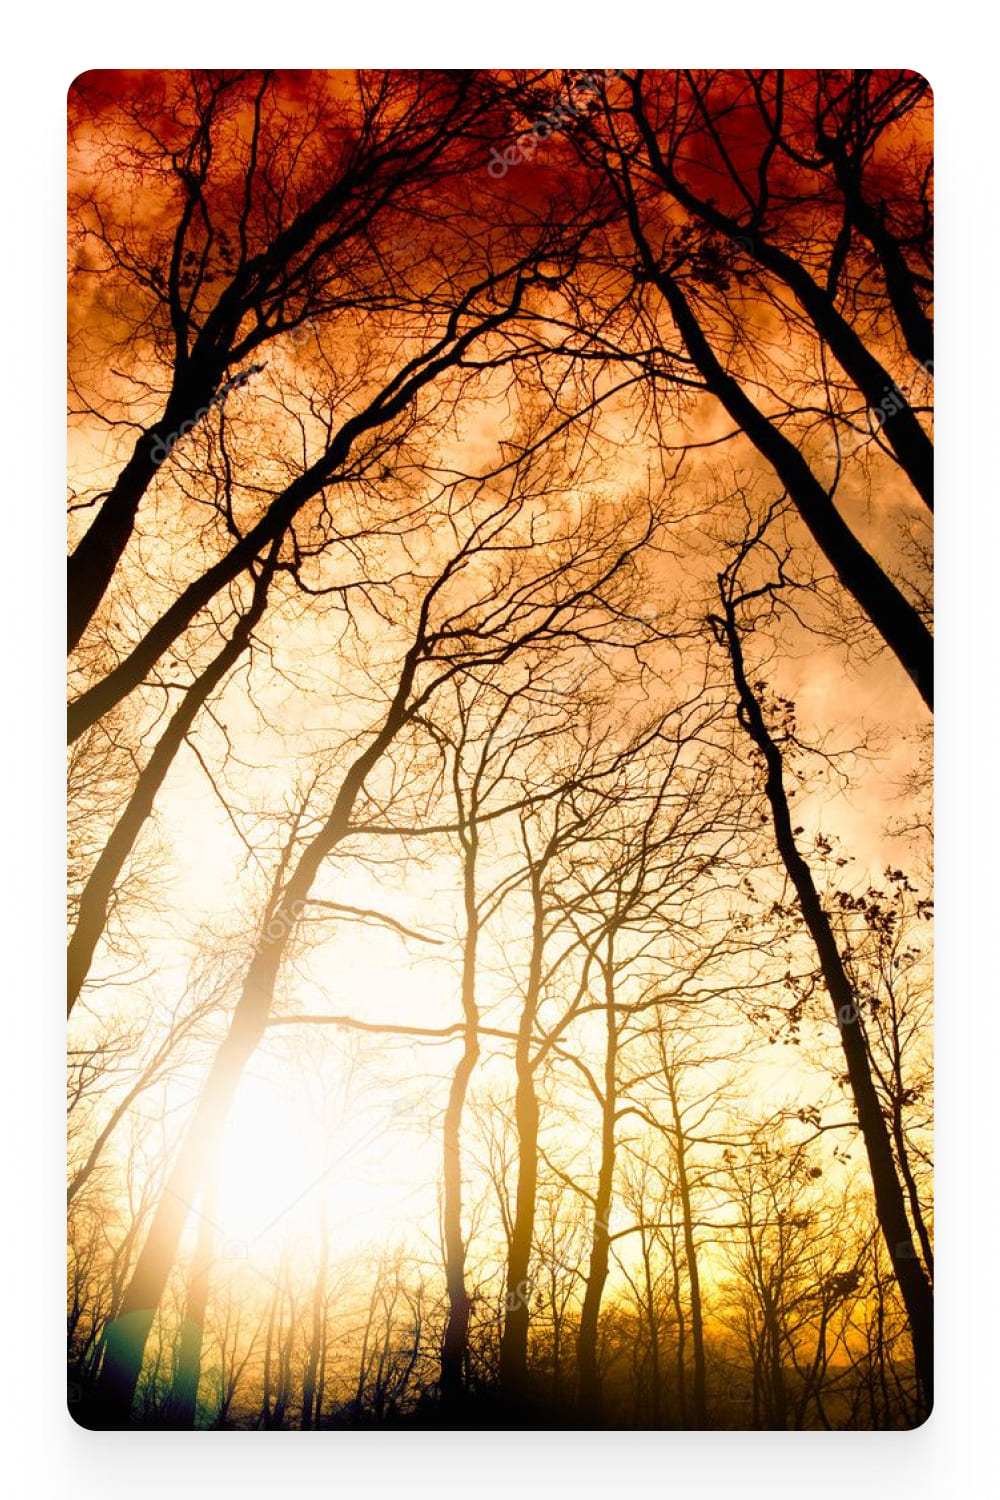 Photo of trees against an orange sky.